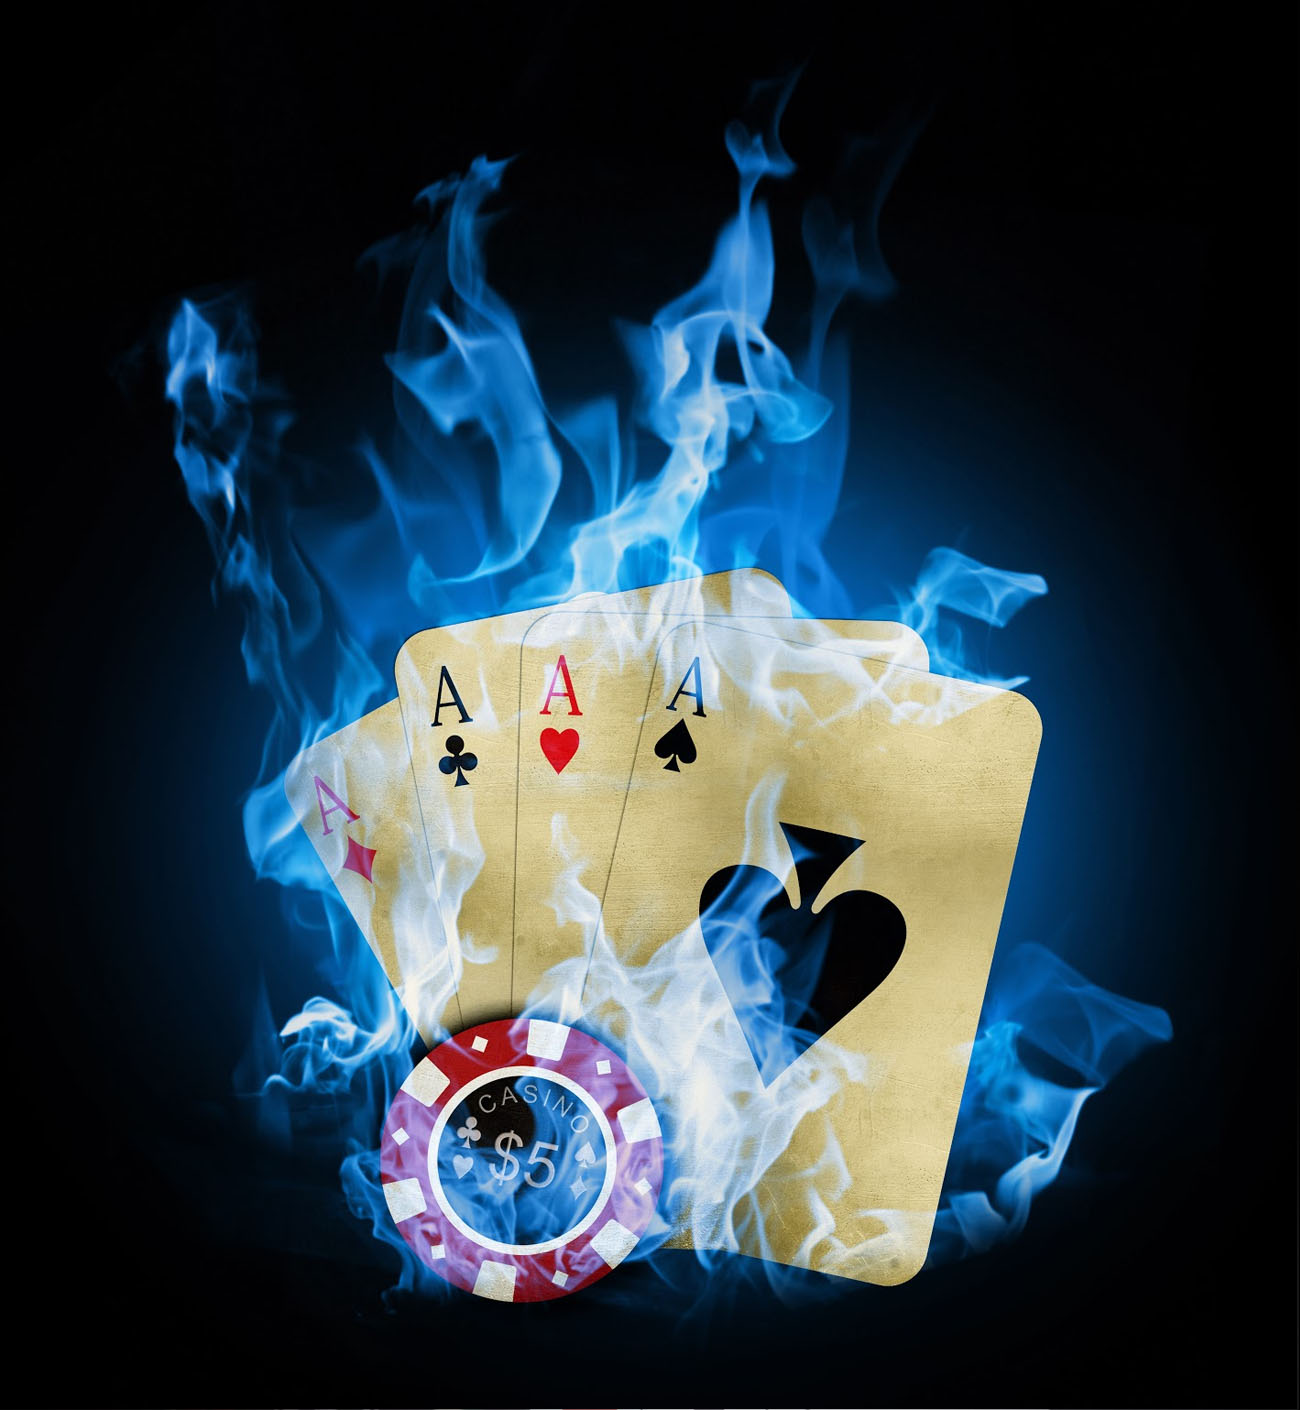 if you are looking for the best shop for spy cheating playing cards software and playing cards lens with cheap price then visit our site actionspycards.com and get here best spy cheaing playing cards with best playing cards lens. Don’t go anywhere only visit our site and get best spy cheaing playing cards with best playing cards lens from our shop.